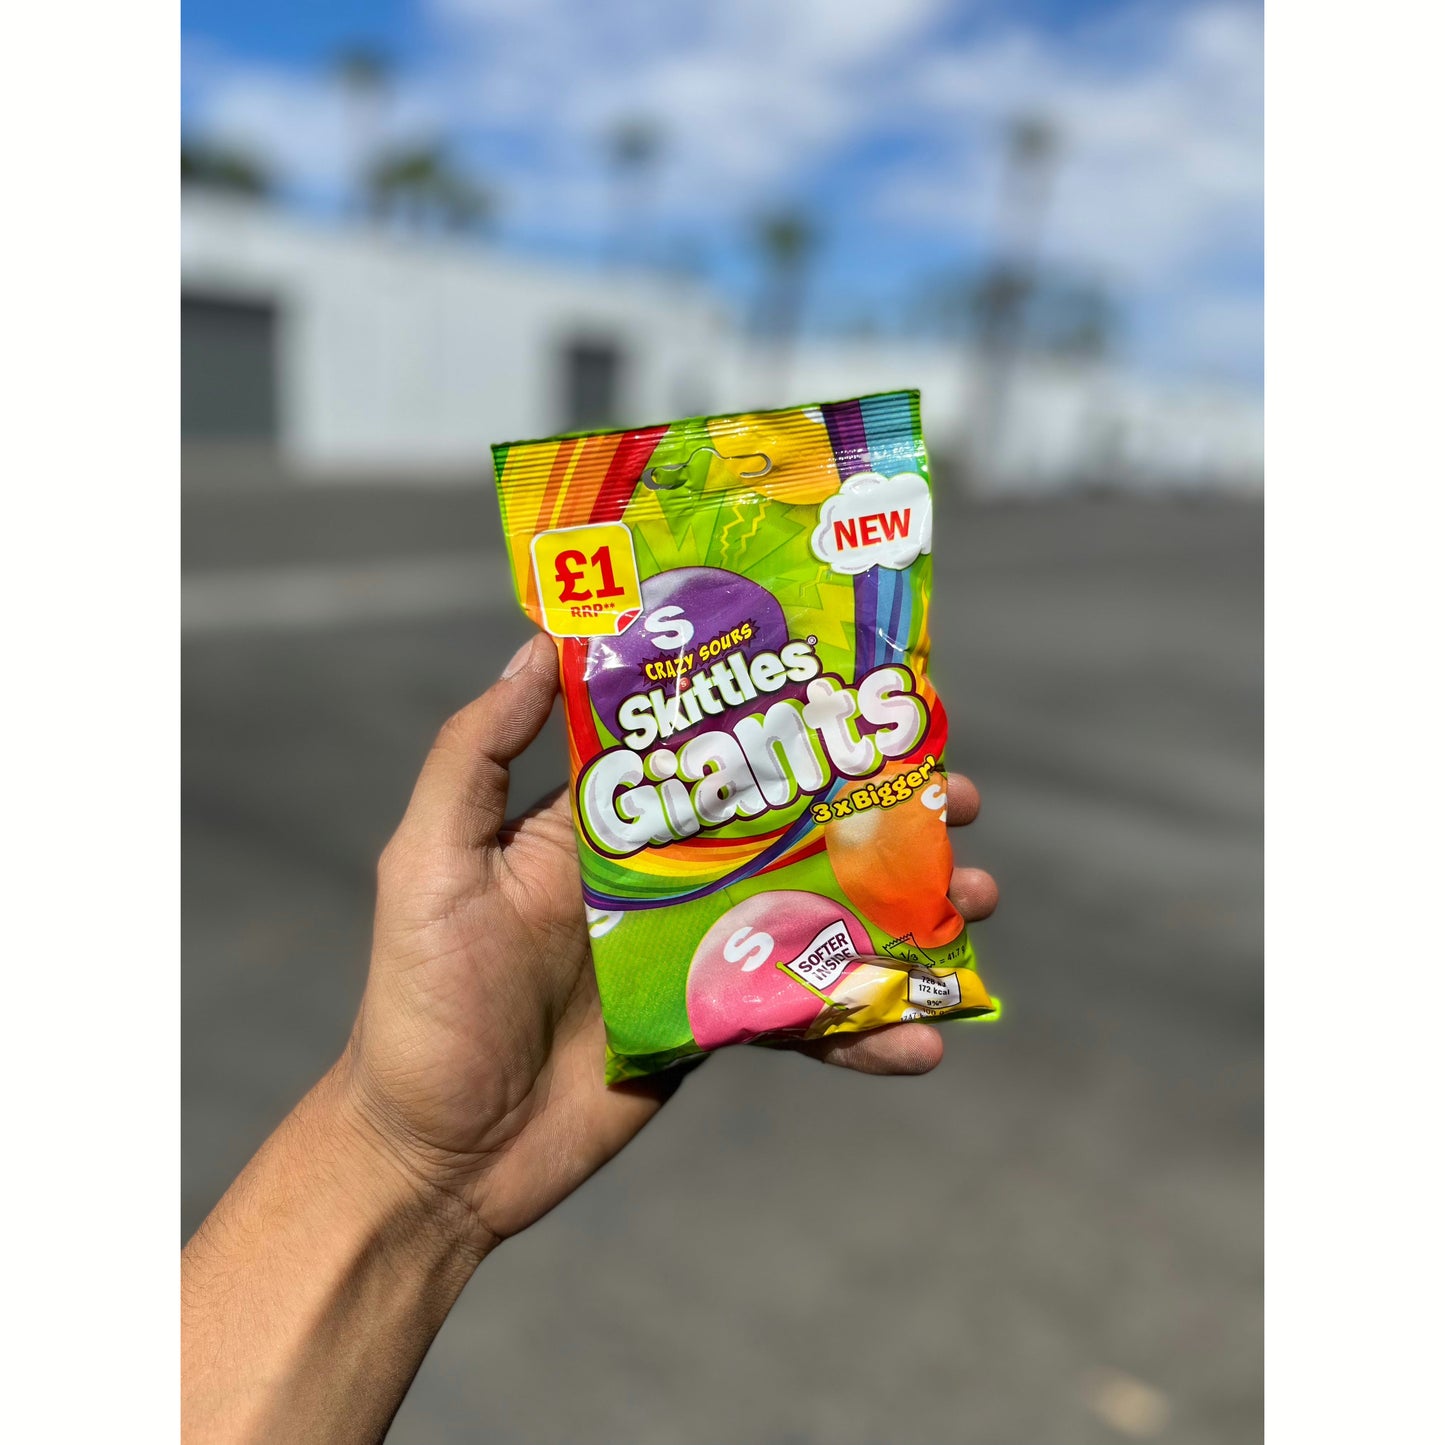 Skittles Giants Crazy Sour Sweets 125g (UK) - Exotic Soda Company